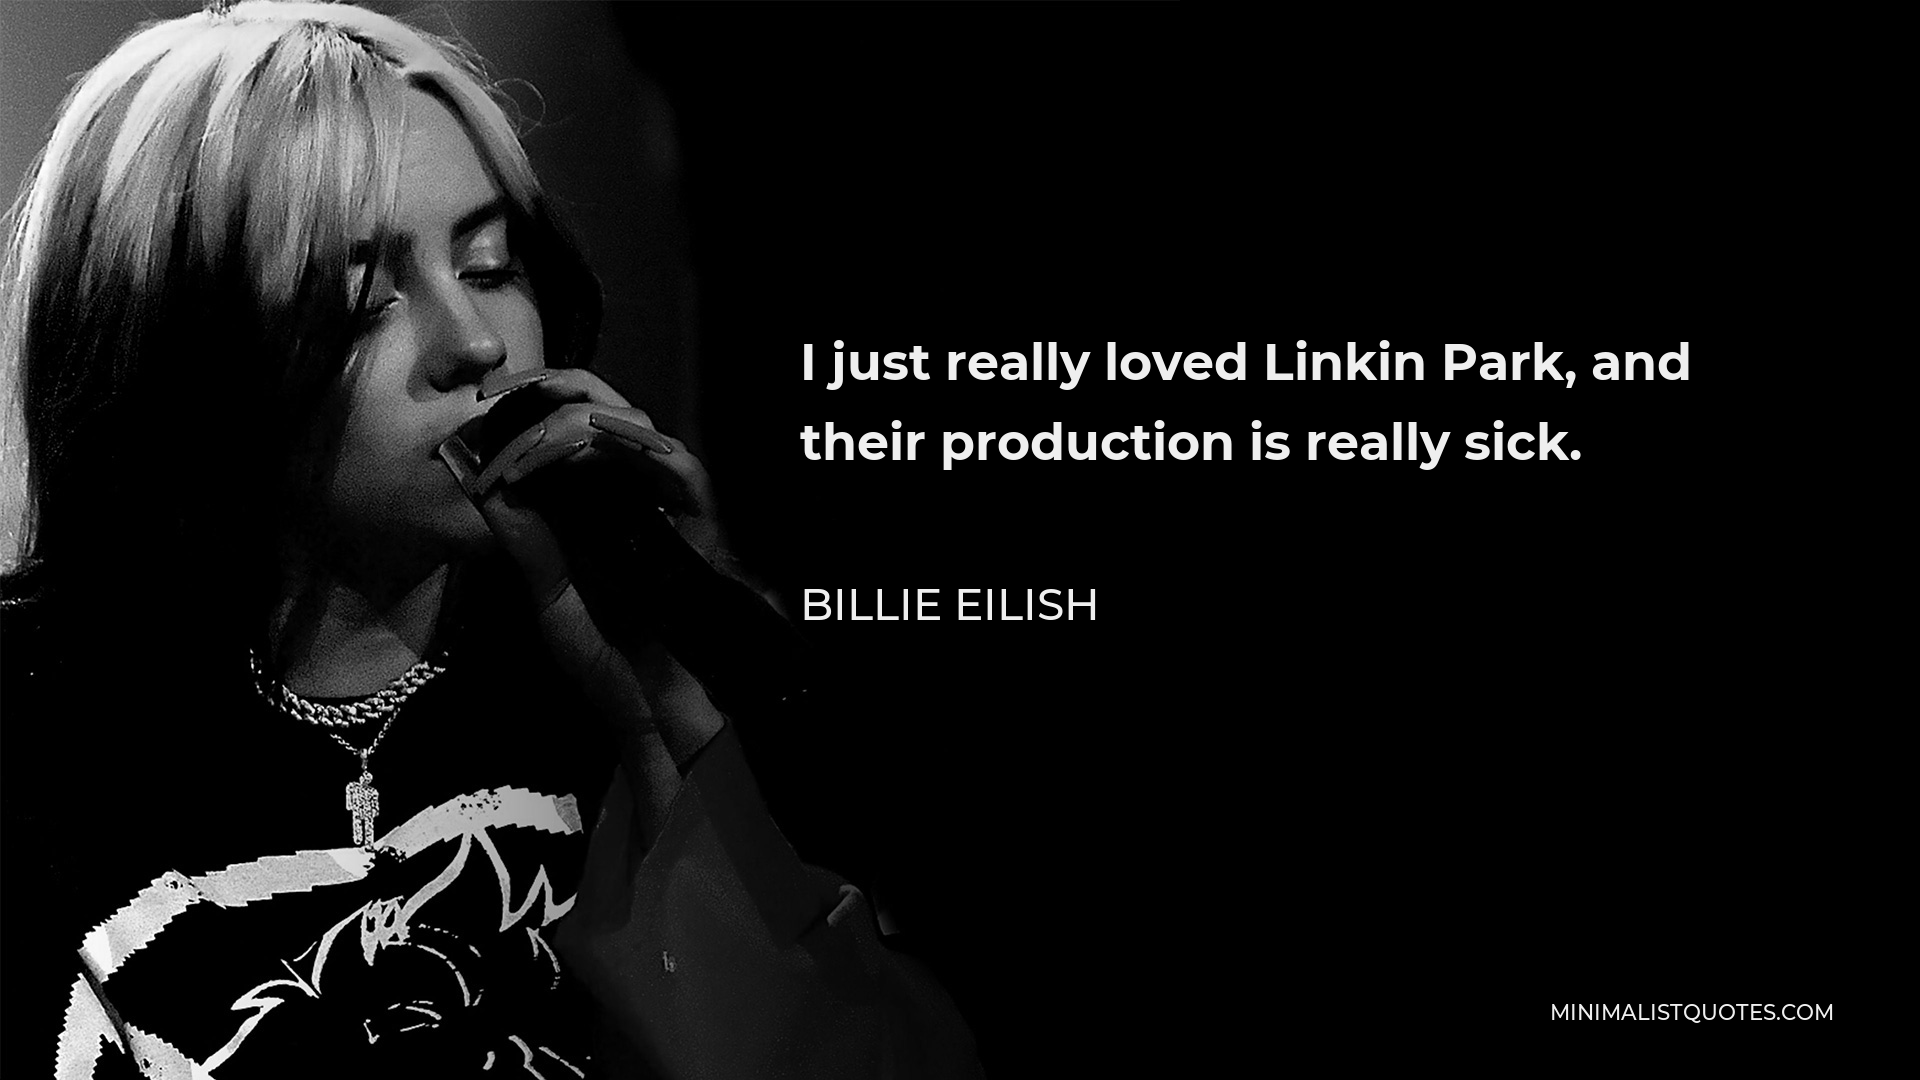 Billie Eilish Quote - I just really loved Linkin Park, and their production is really sick.